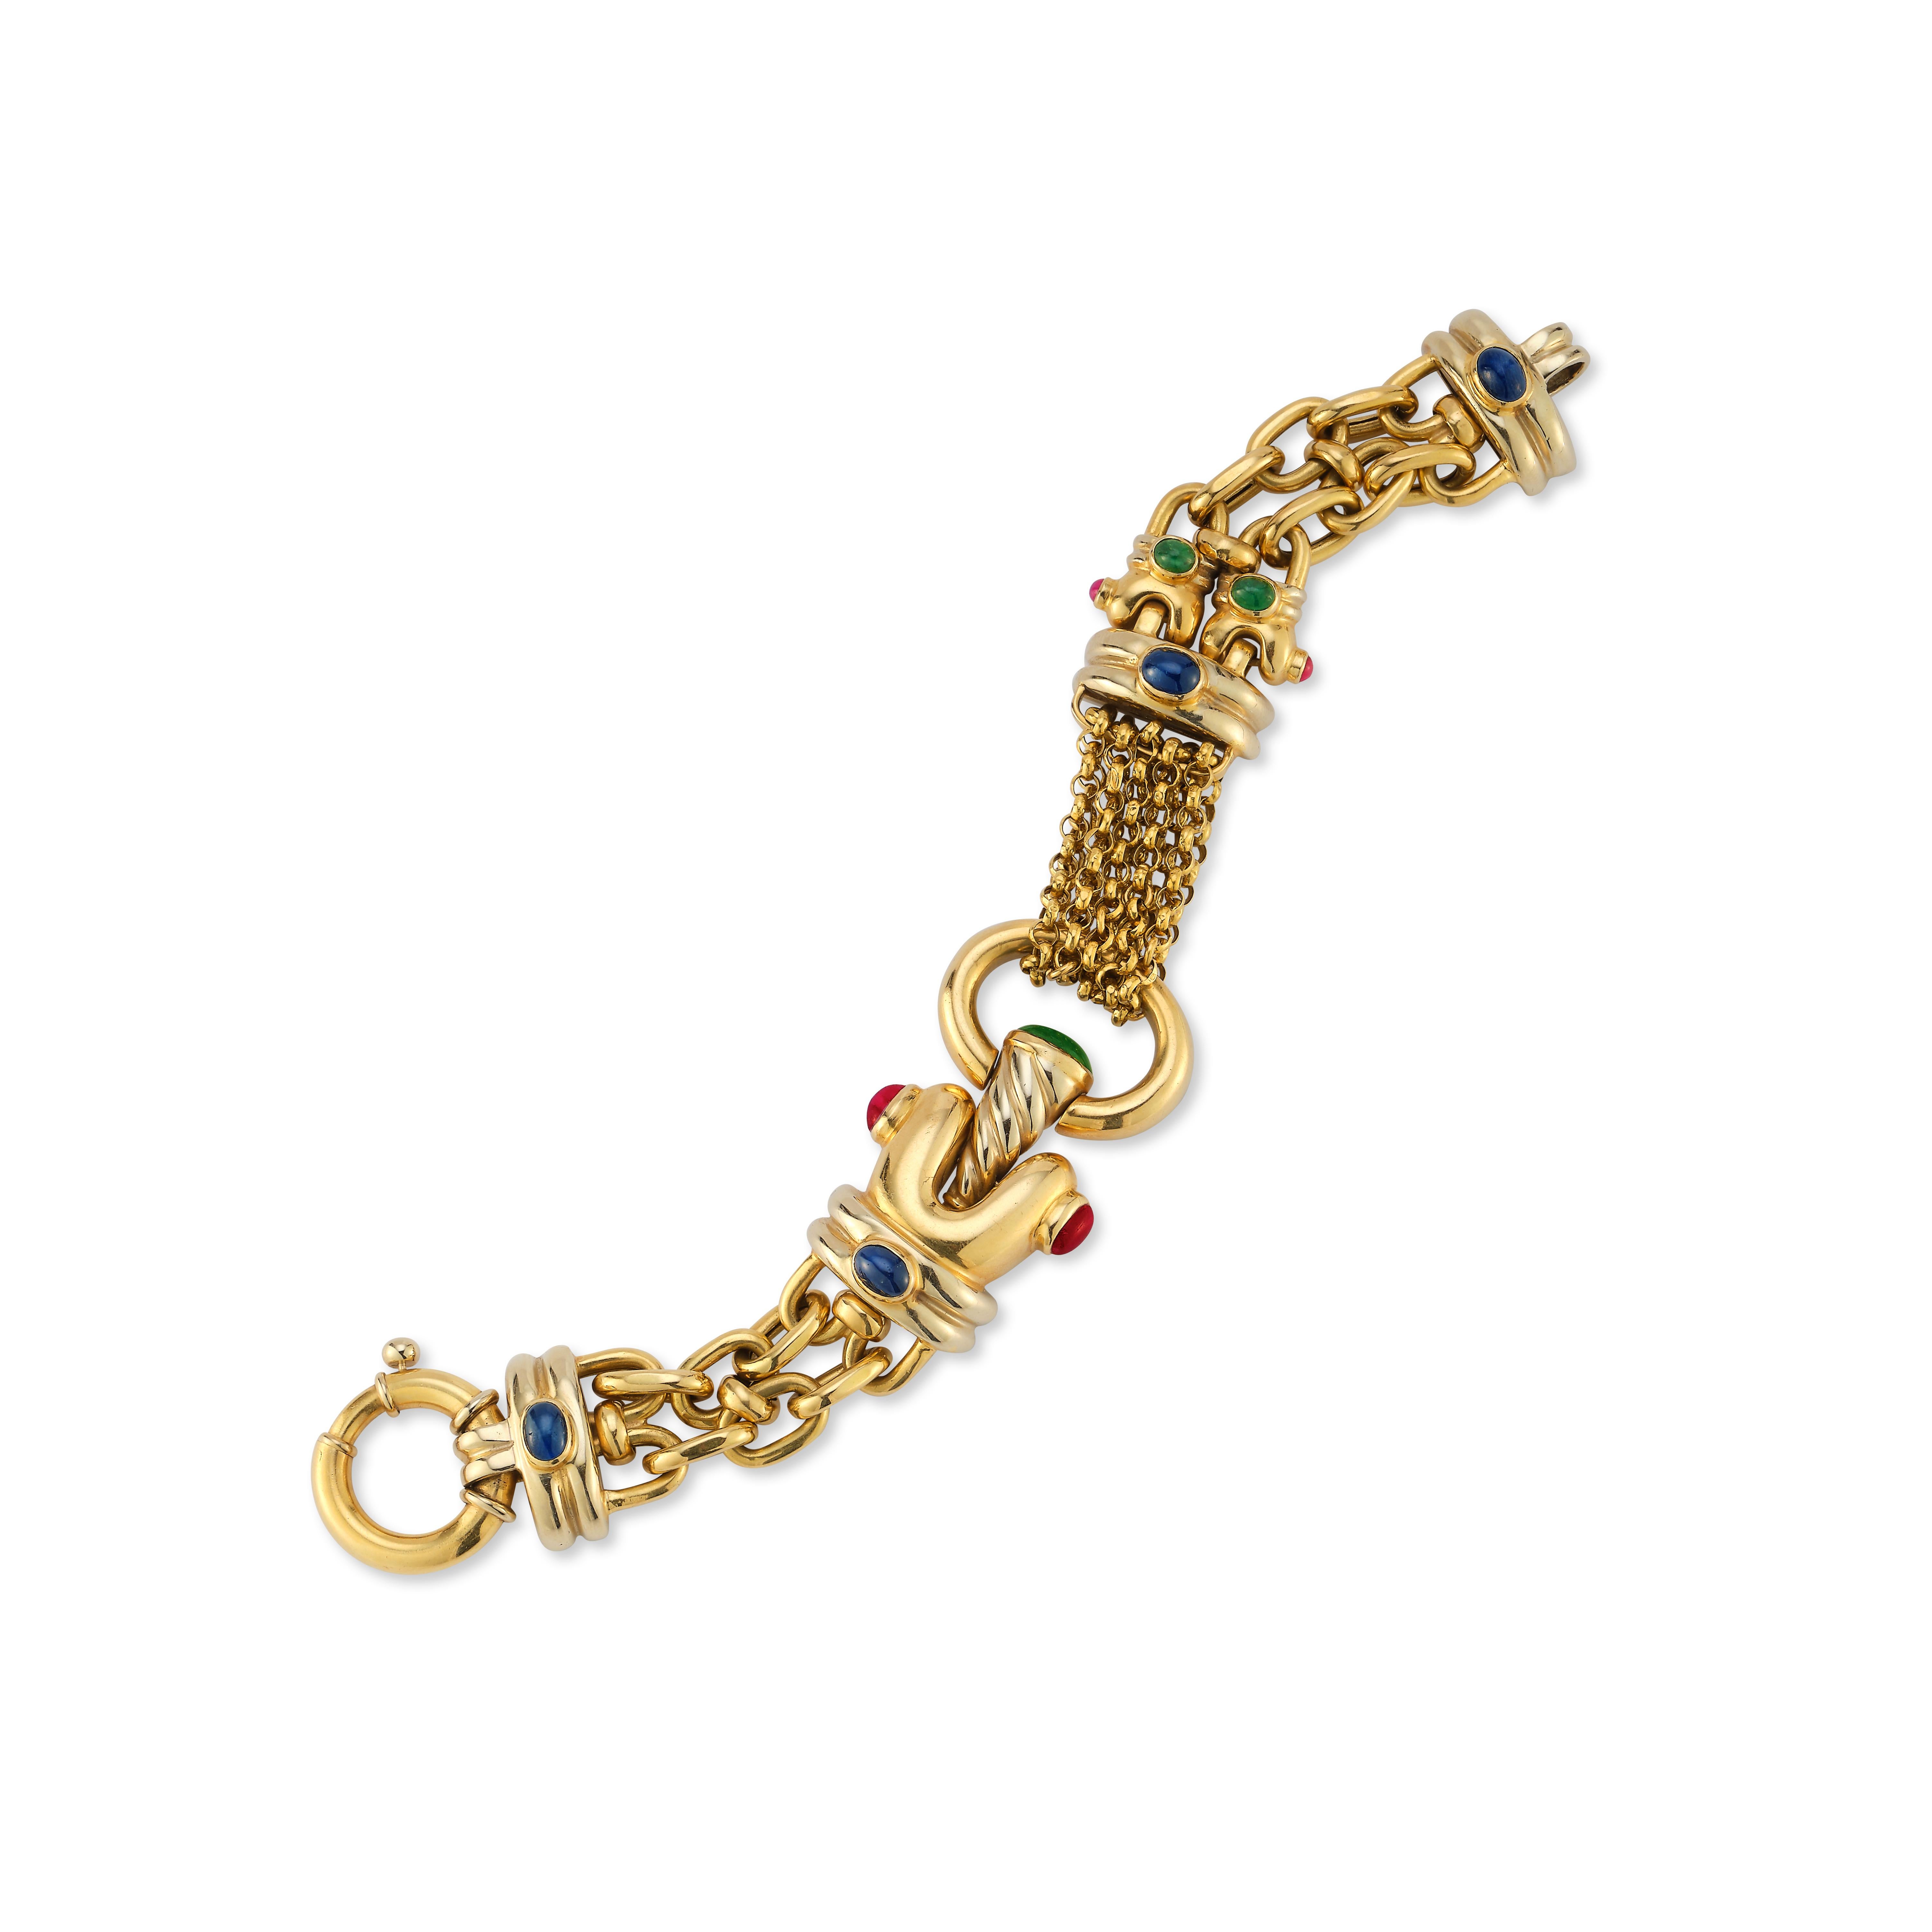 Multi Gem Gold Link Bracelet

A combination of various gold links with cabochon sapphires, rubies & emeralds set in 18k yellow gold.

Measurements: 8.5